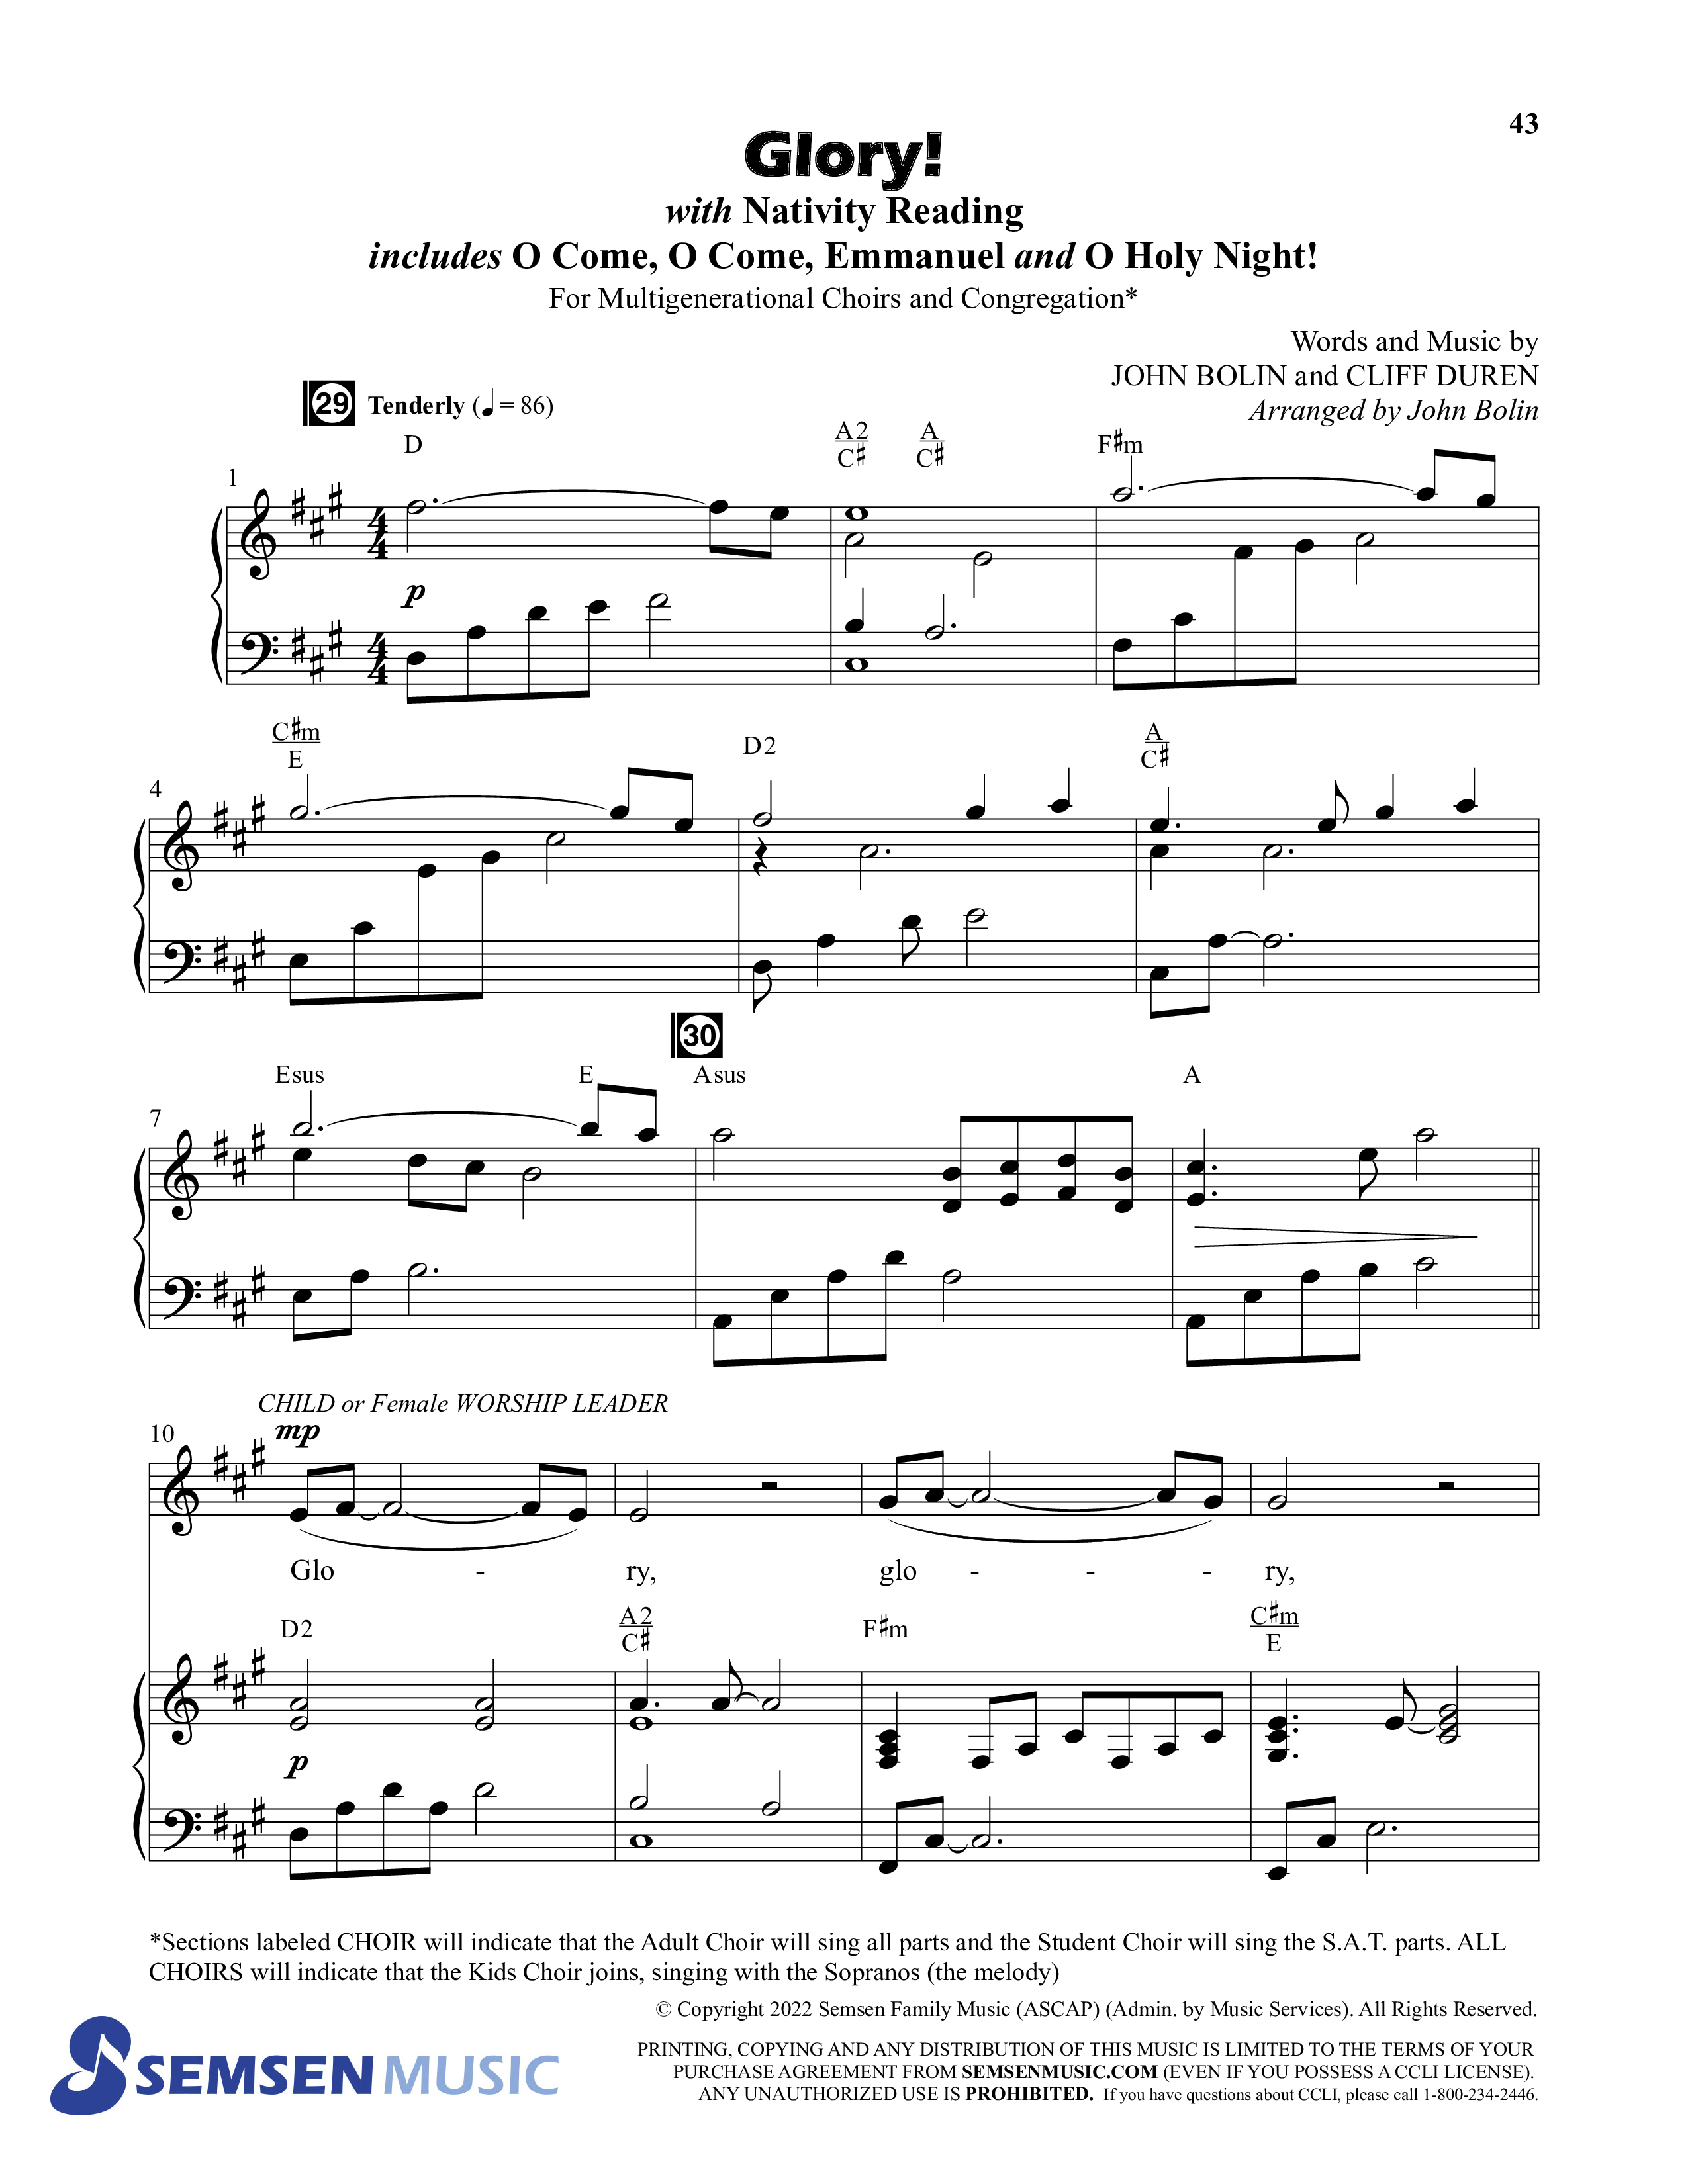 Wonderful (8 Song Choral Collection) Song 4 (Piano SATB) (Semsen Music / Arr. John Bolin / Orch. Cliff Duren)